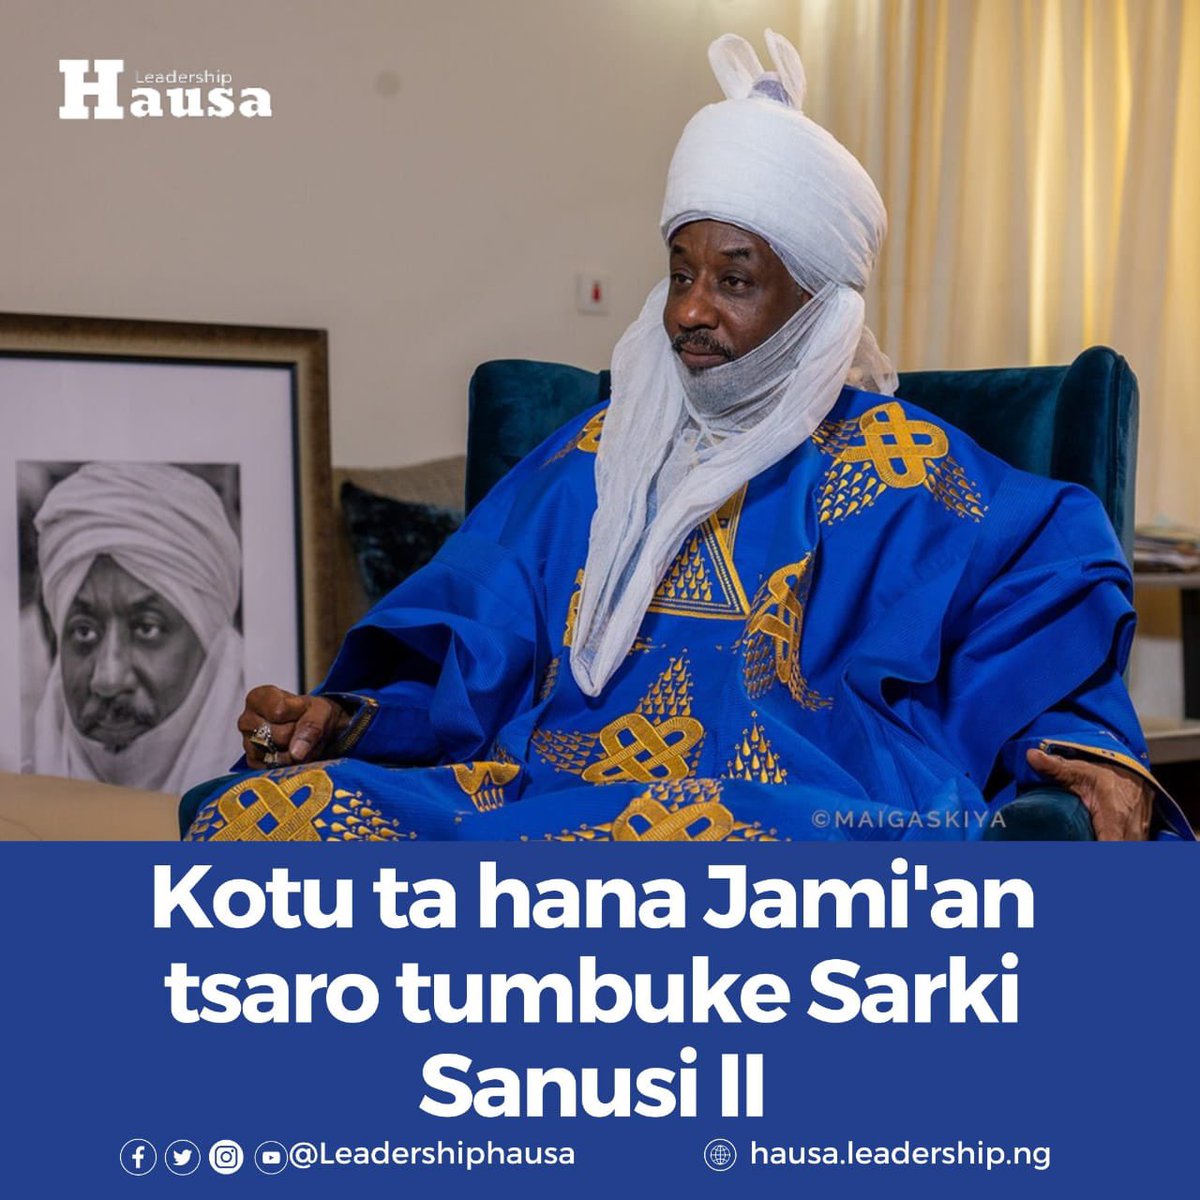 The Kano State High Court has ordered security forces not to remove the reinstated the 16th Emir of Kano, Muhammadu Sanusi II, and to also remove the 15th Emir of Kano, Aminu Ado Bayero from the palace. Meanwhile, the Federal High Court in Kano has issued an order prohibiting